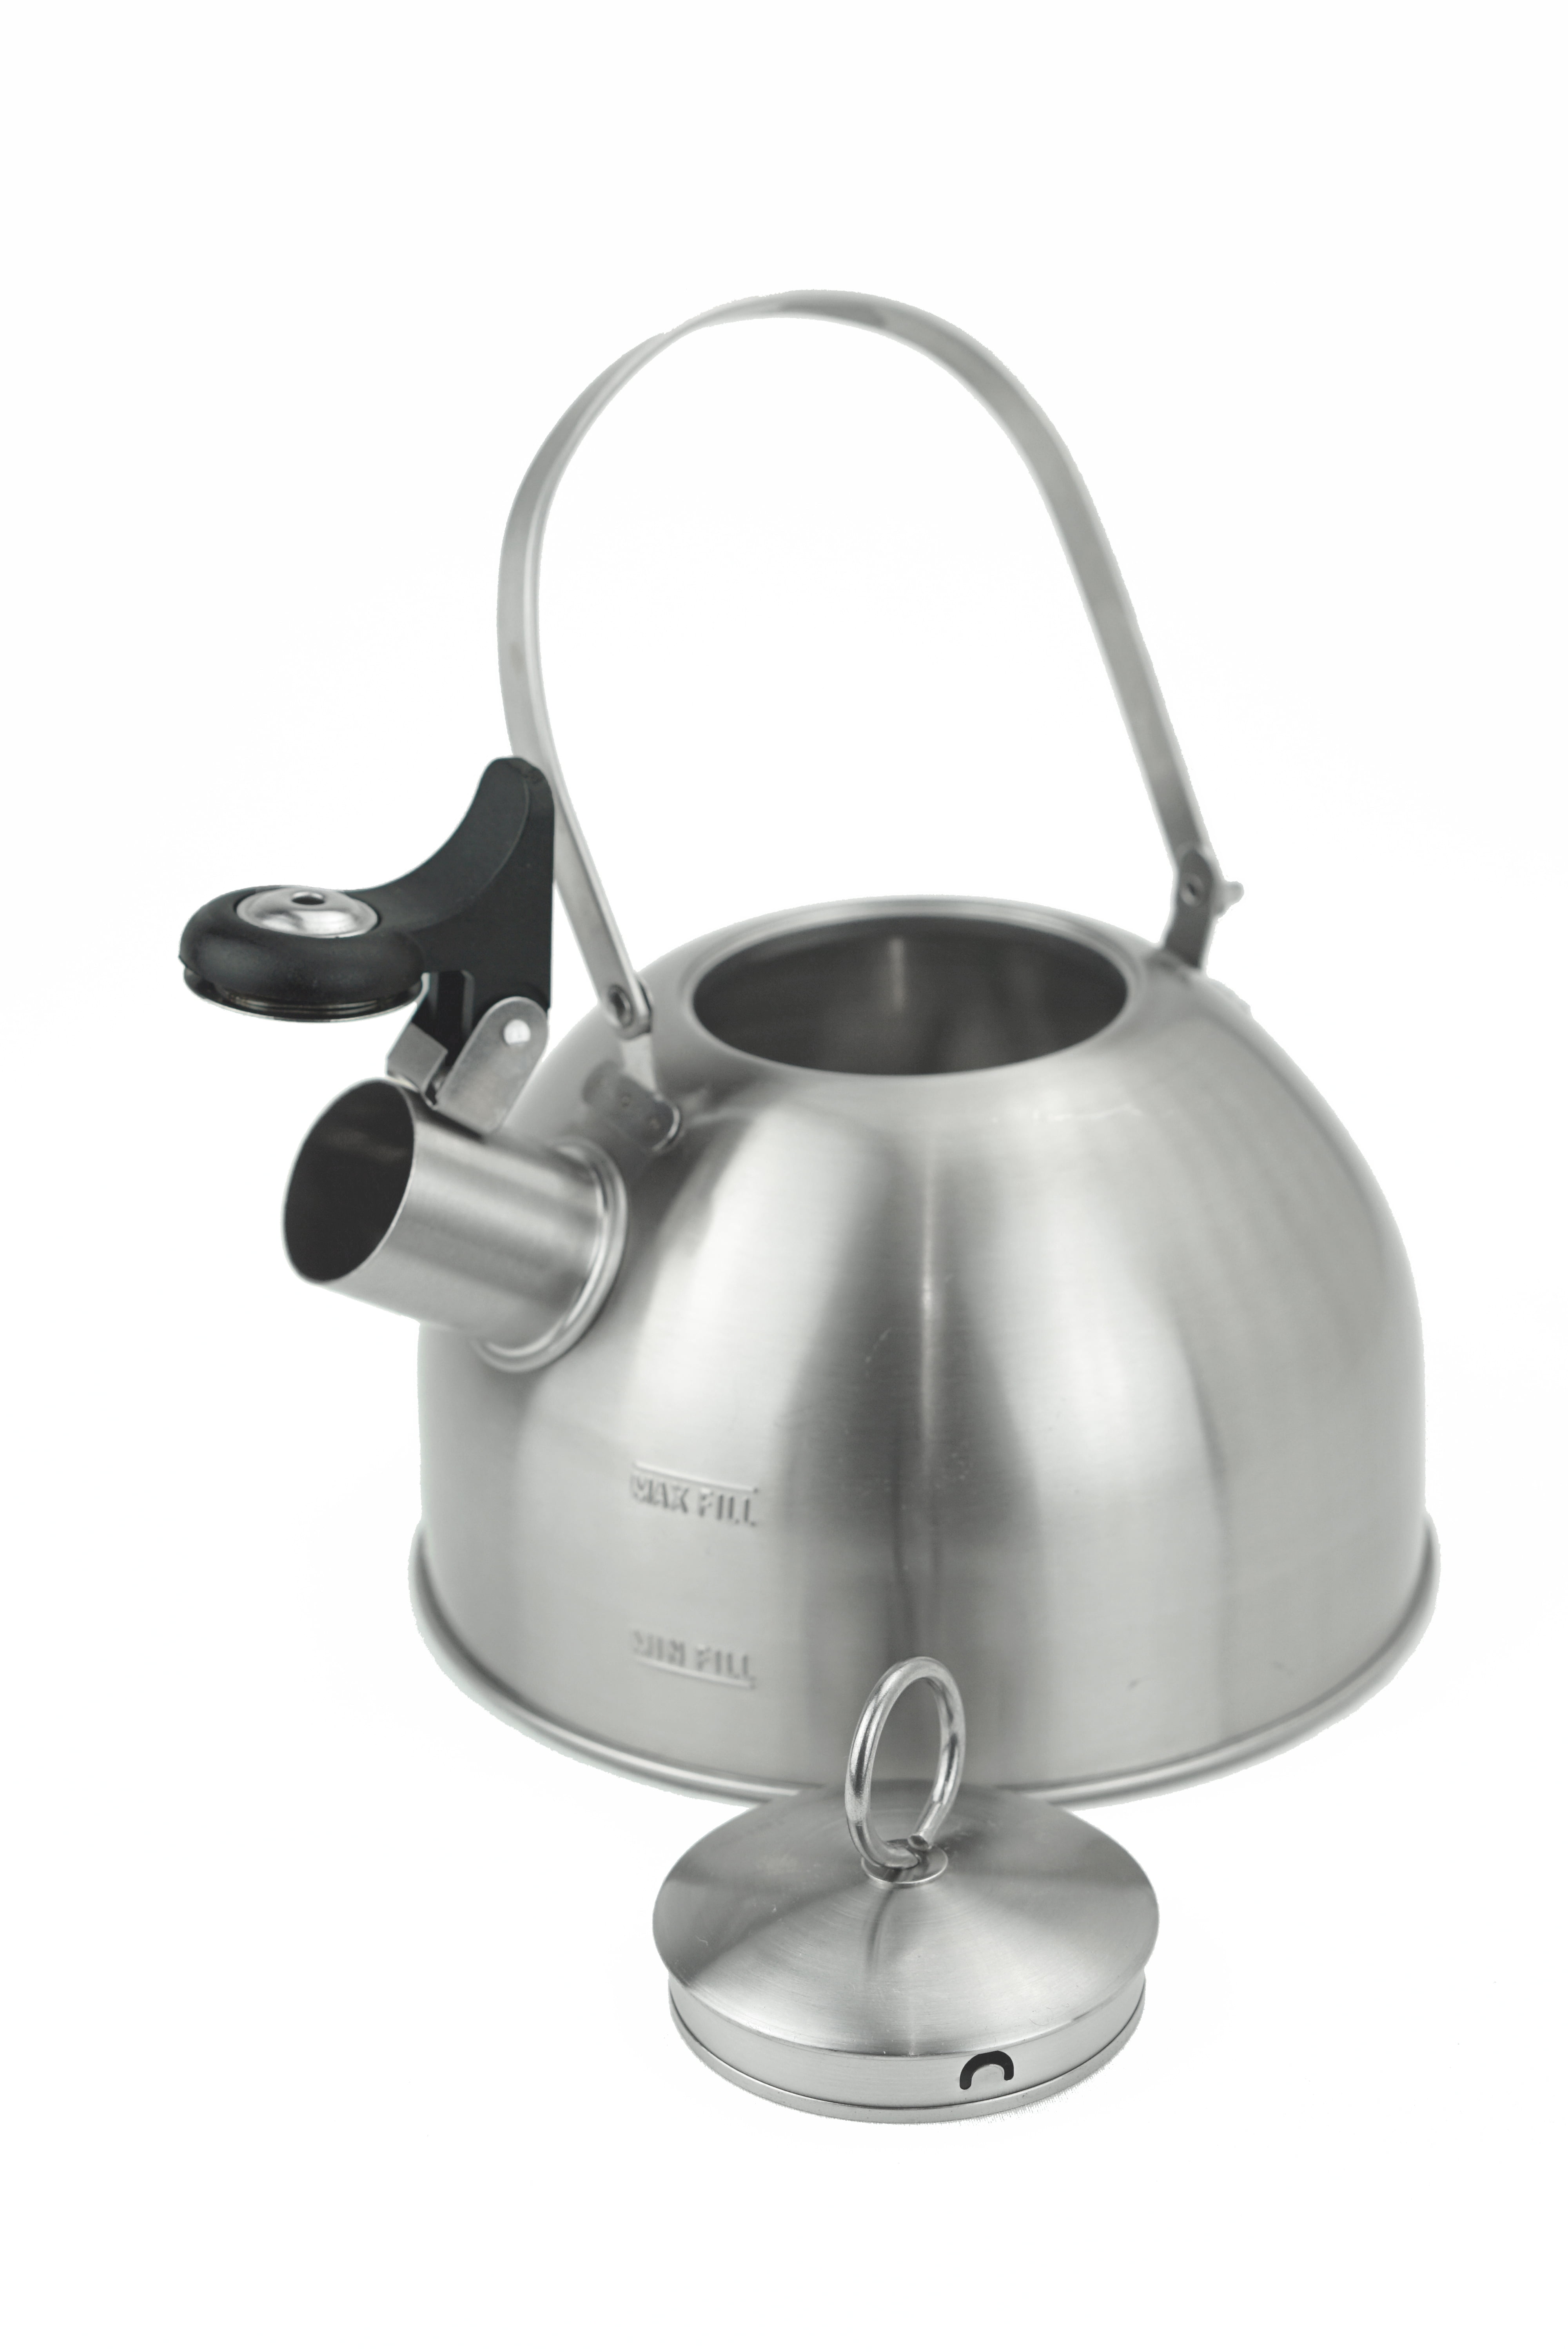 Heat Resistant Camping Kettle Stainless Steel Tea Kettle Teakettle Easy to Clean Compact Tea Pot for Backpacking Campfire Outdoor Barbecue Argent